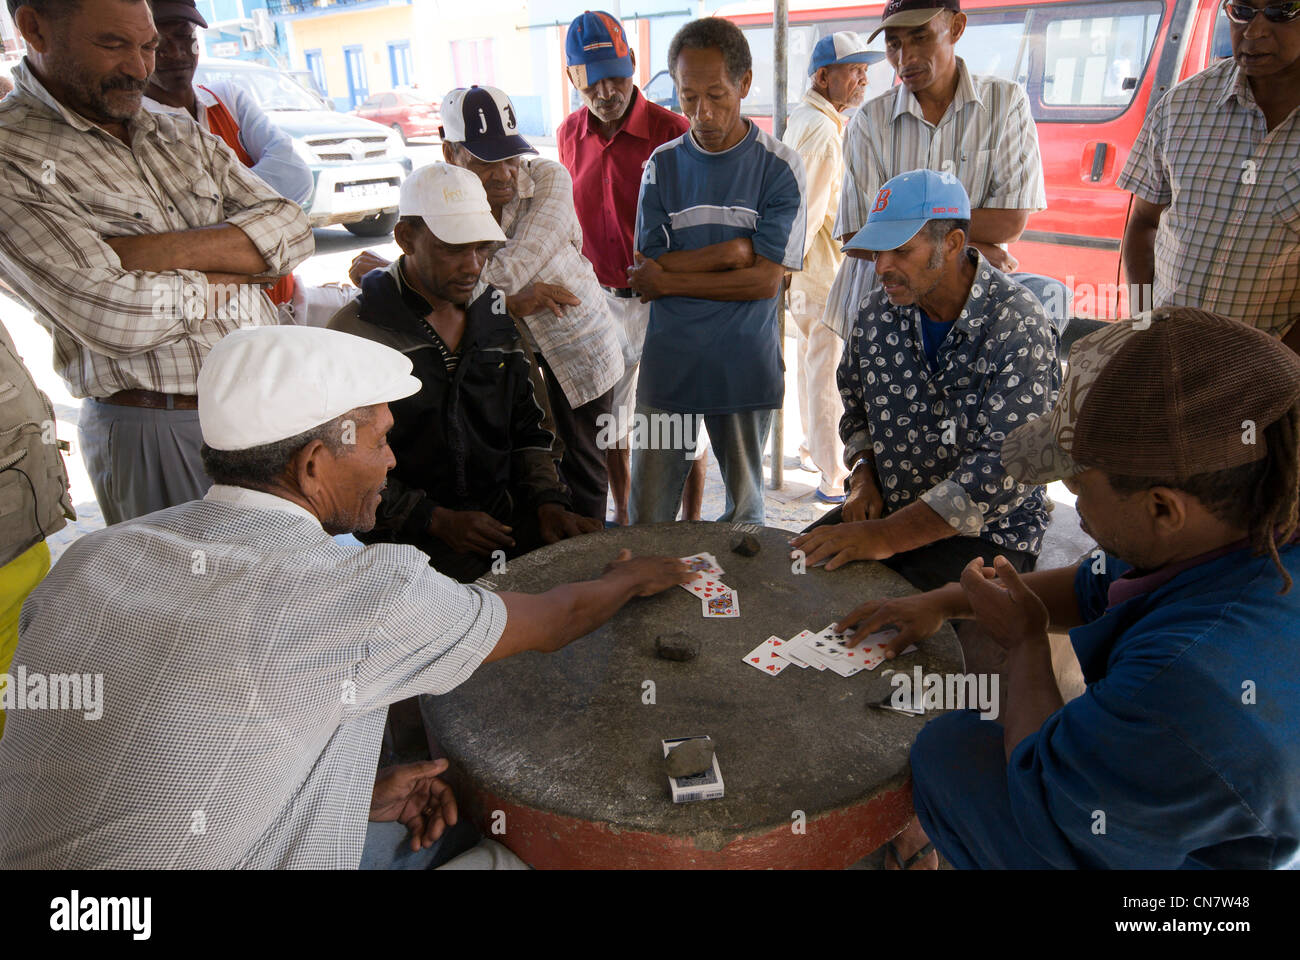 Cape Verde, Sao Vicente island, Mindelo, game of cards after the fishing Stock Photo